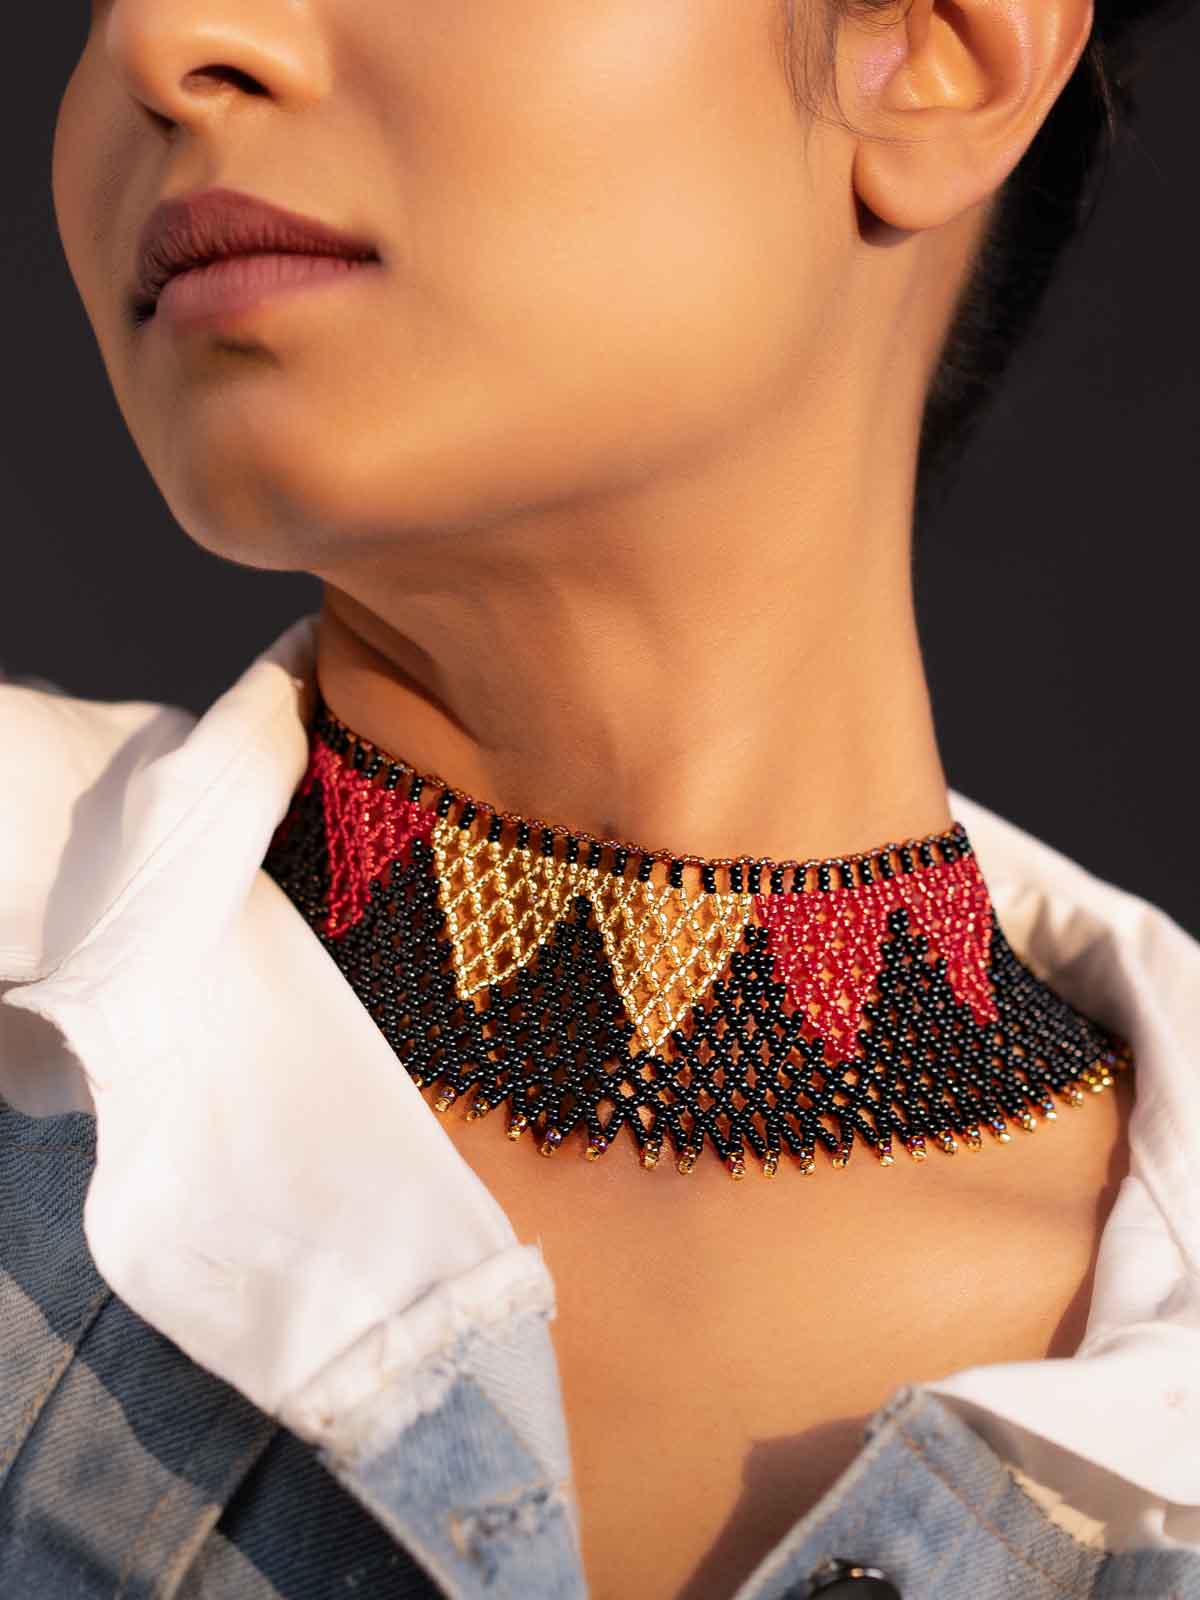 The Black & Red Collar Necklace